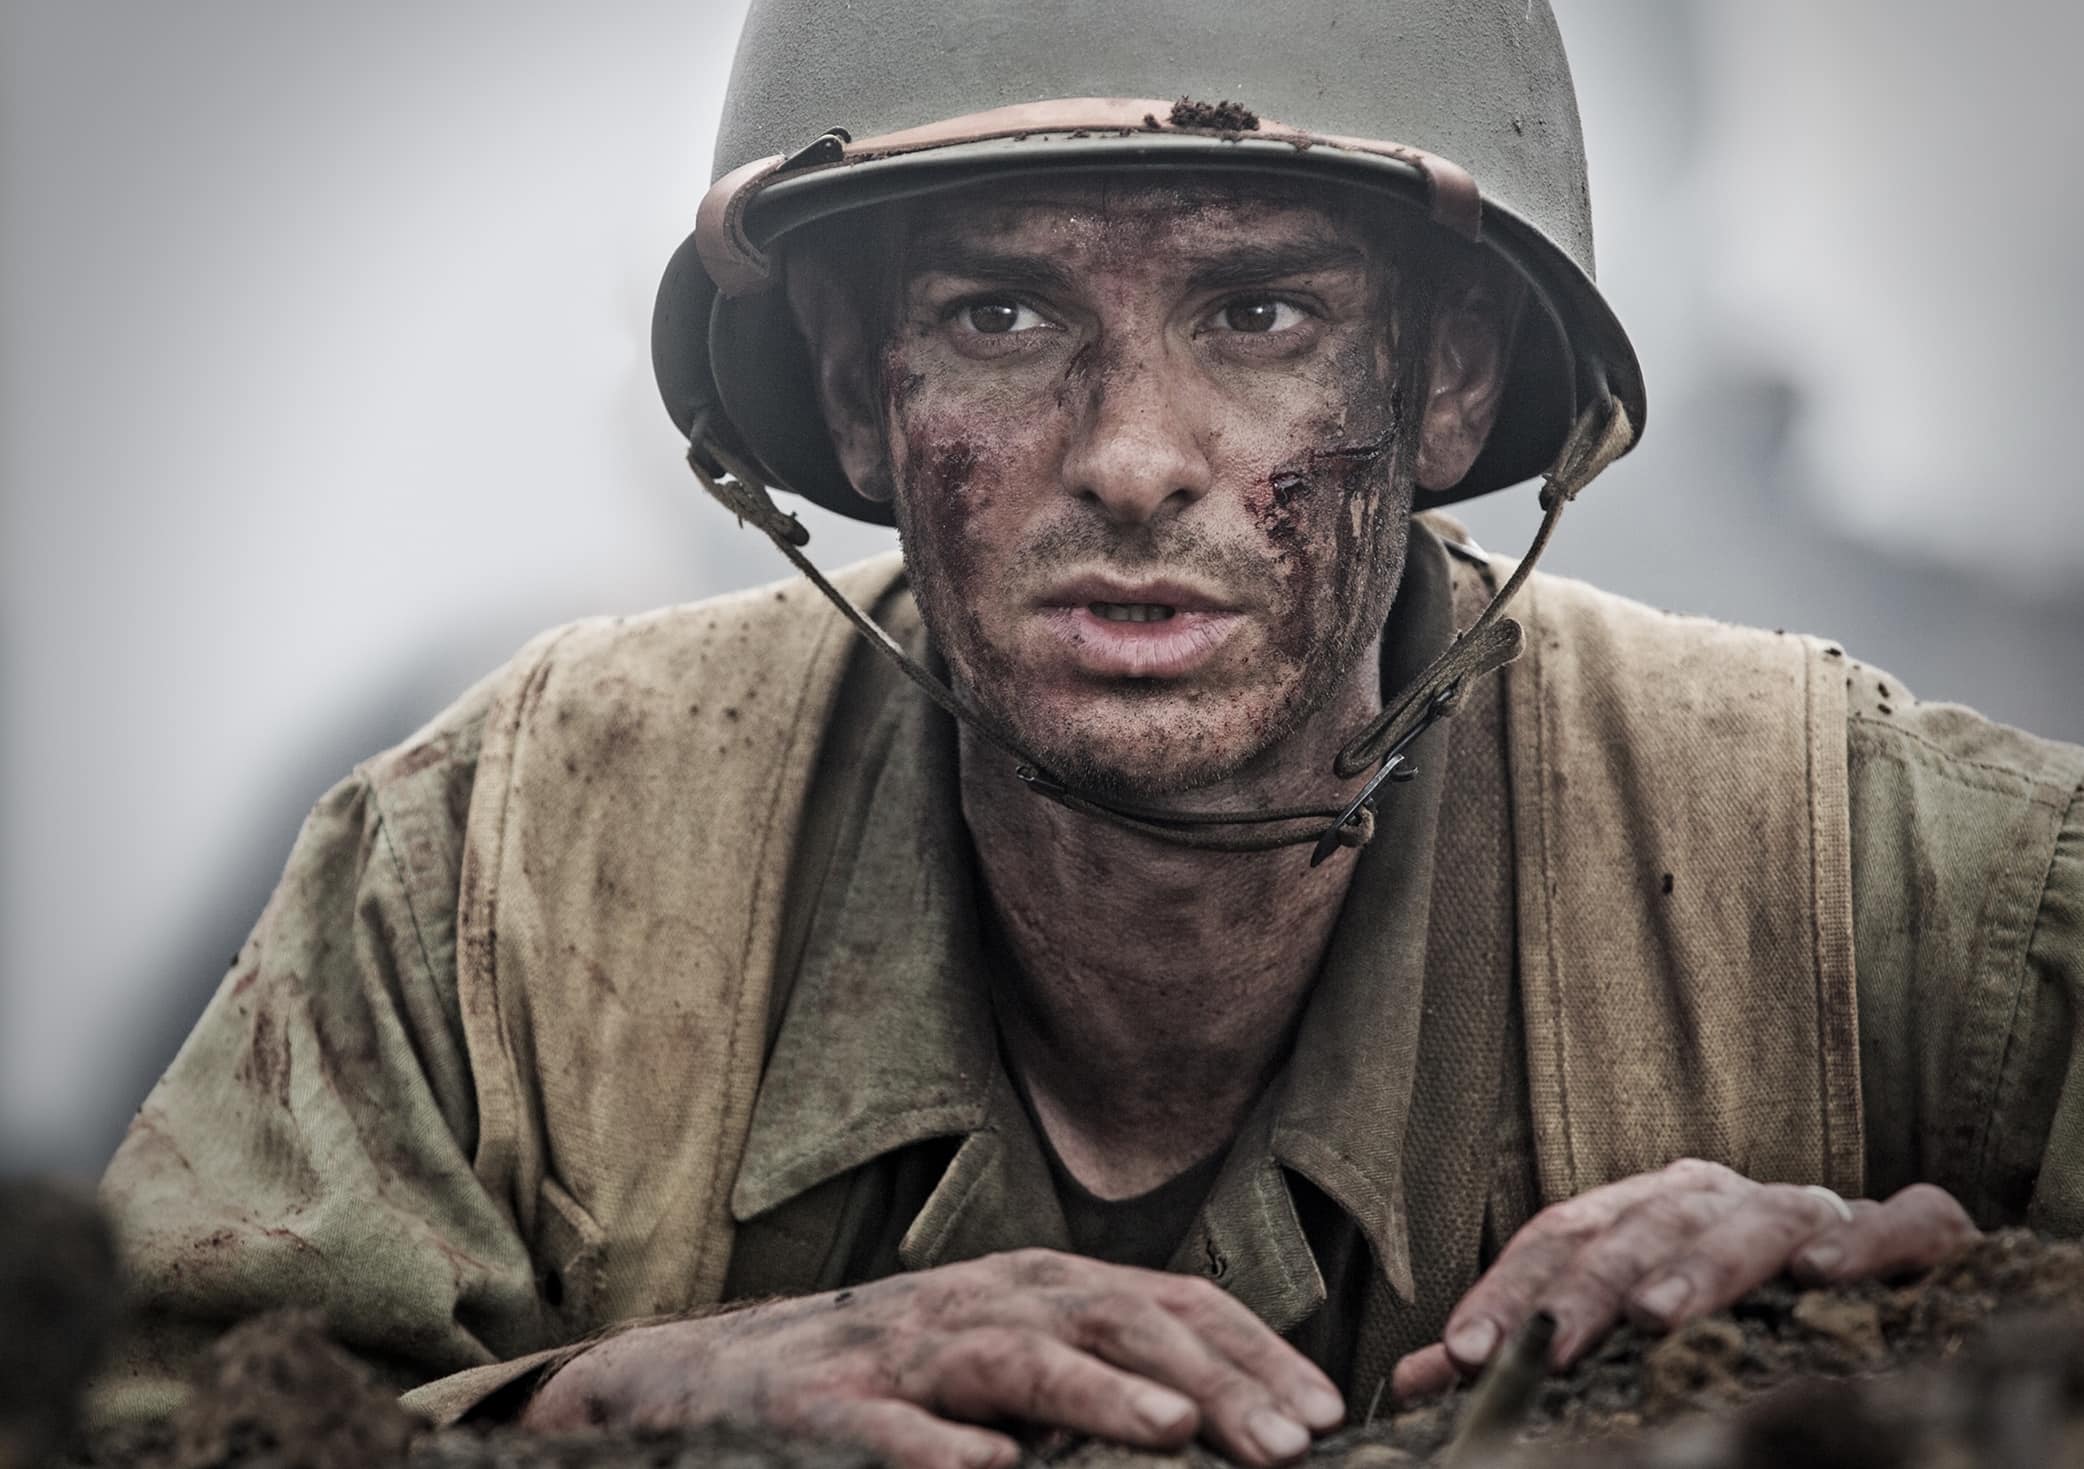 Andrew Garfield was 32 years old when filming the acclaimed historical drama Hacksaw Ridge as Desmond Doss